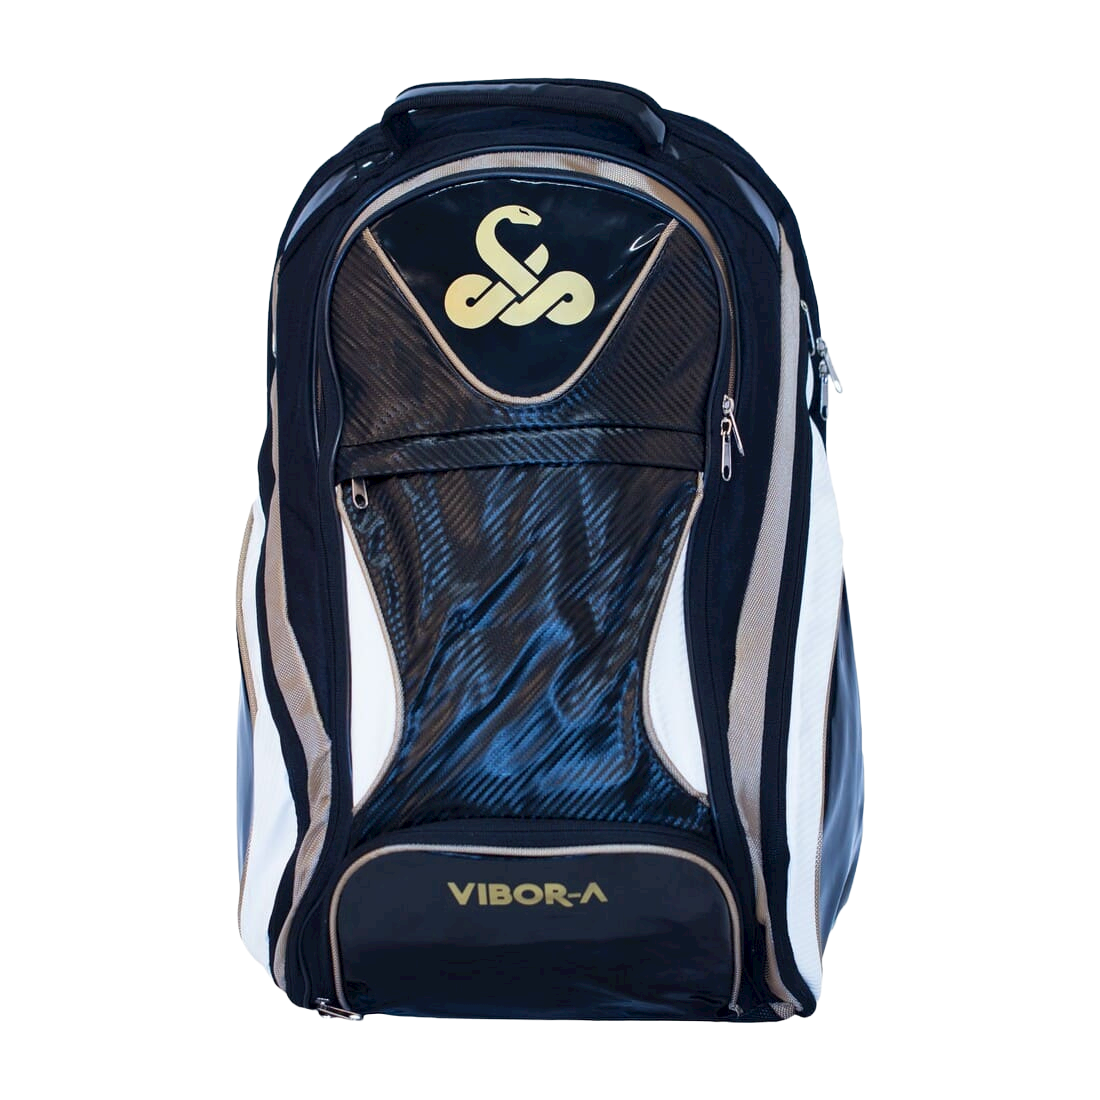 BACKPACK VIBOR-A SILVER (BLUE, SILVER, GOLD)